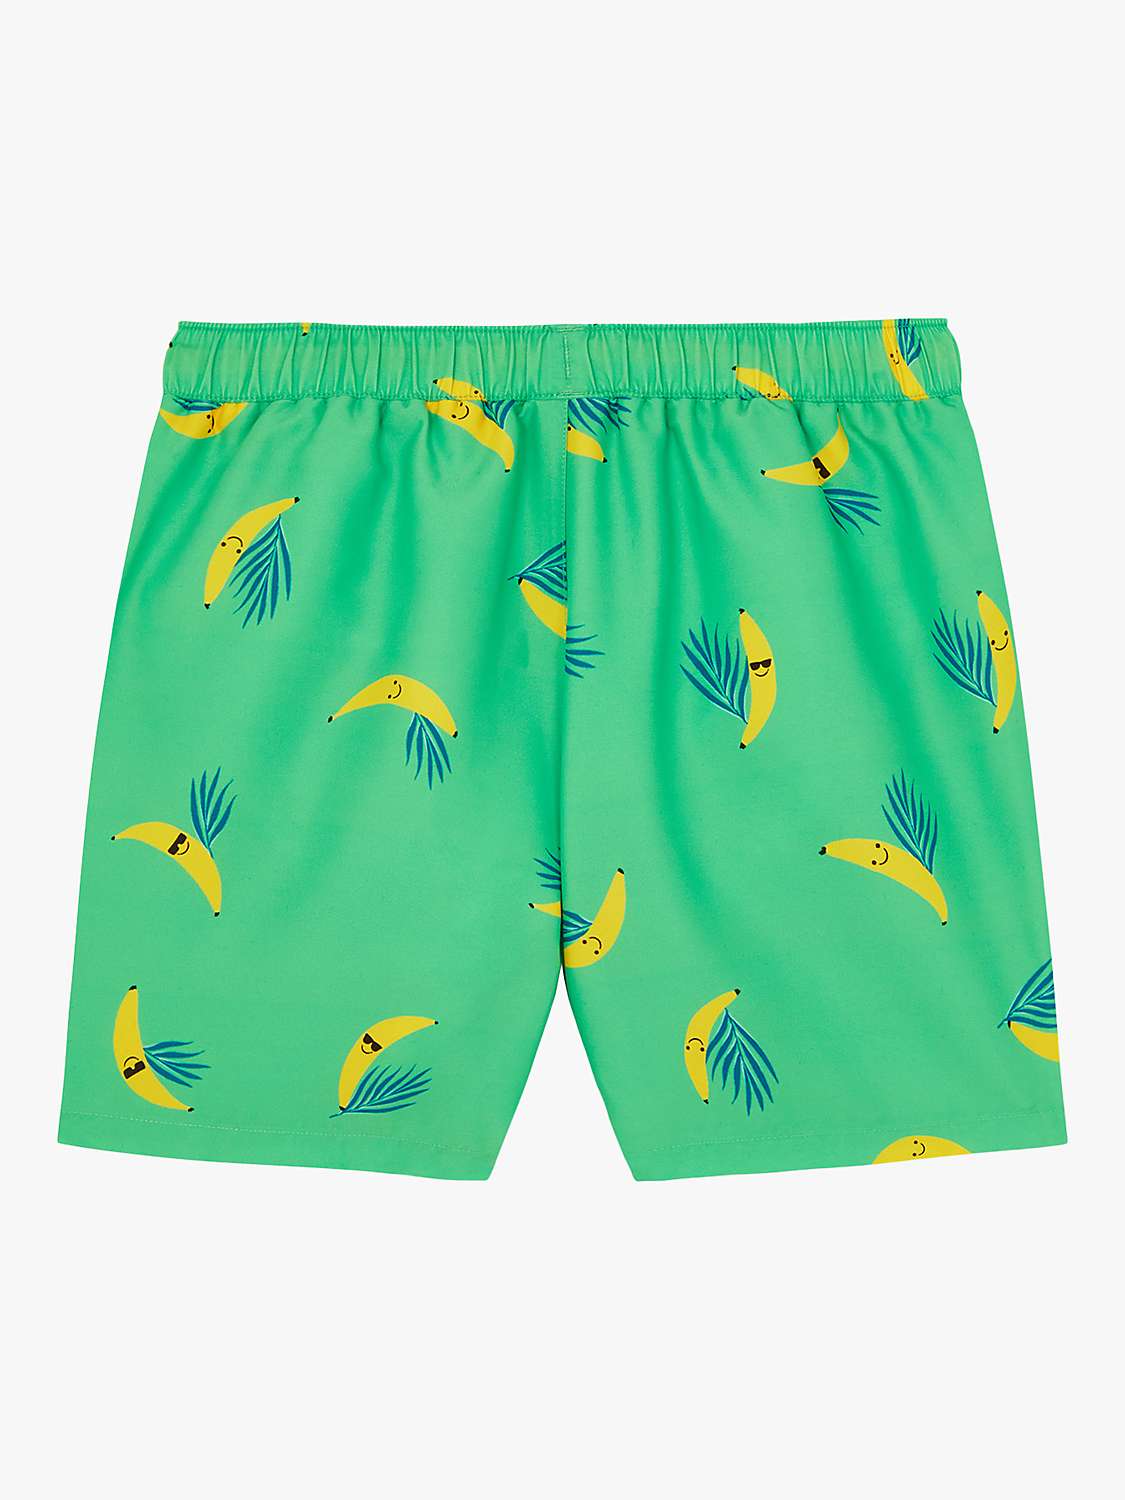 Buy Angels by Accessorize Kids' Banana Print Swim Shorts, Green/Multi Online at johnlewis.com